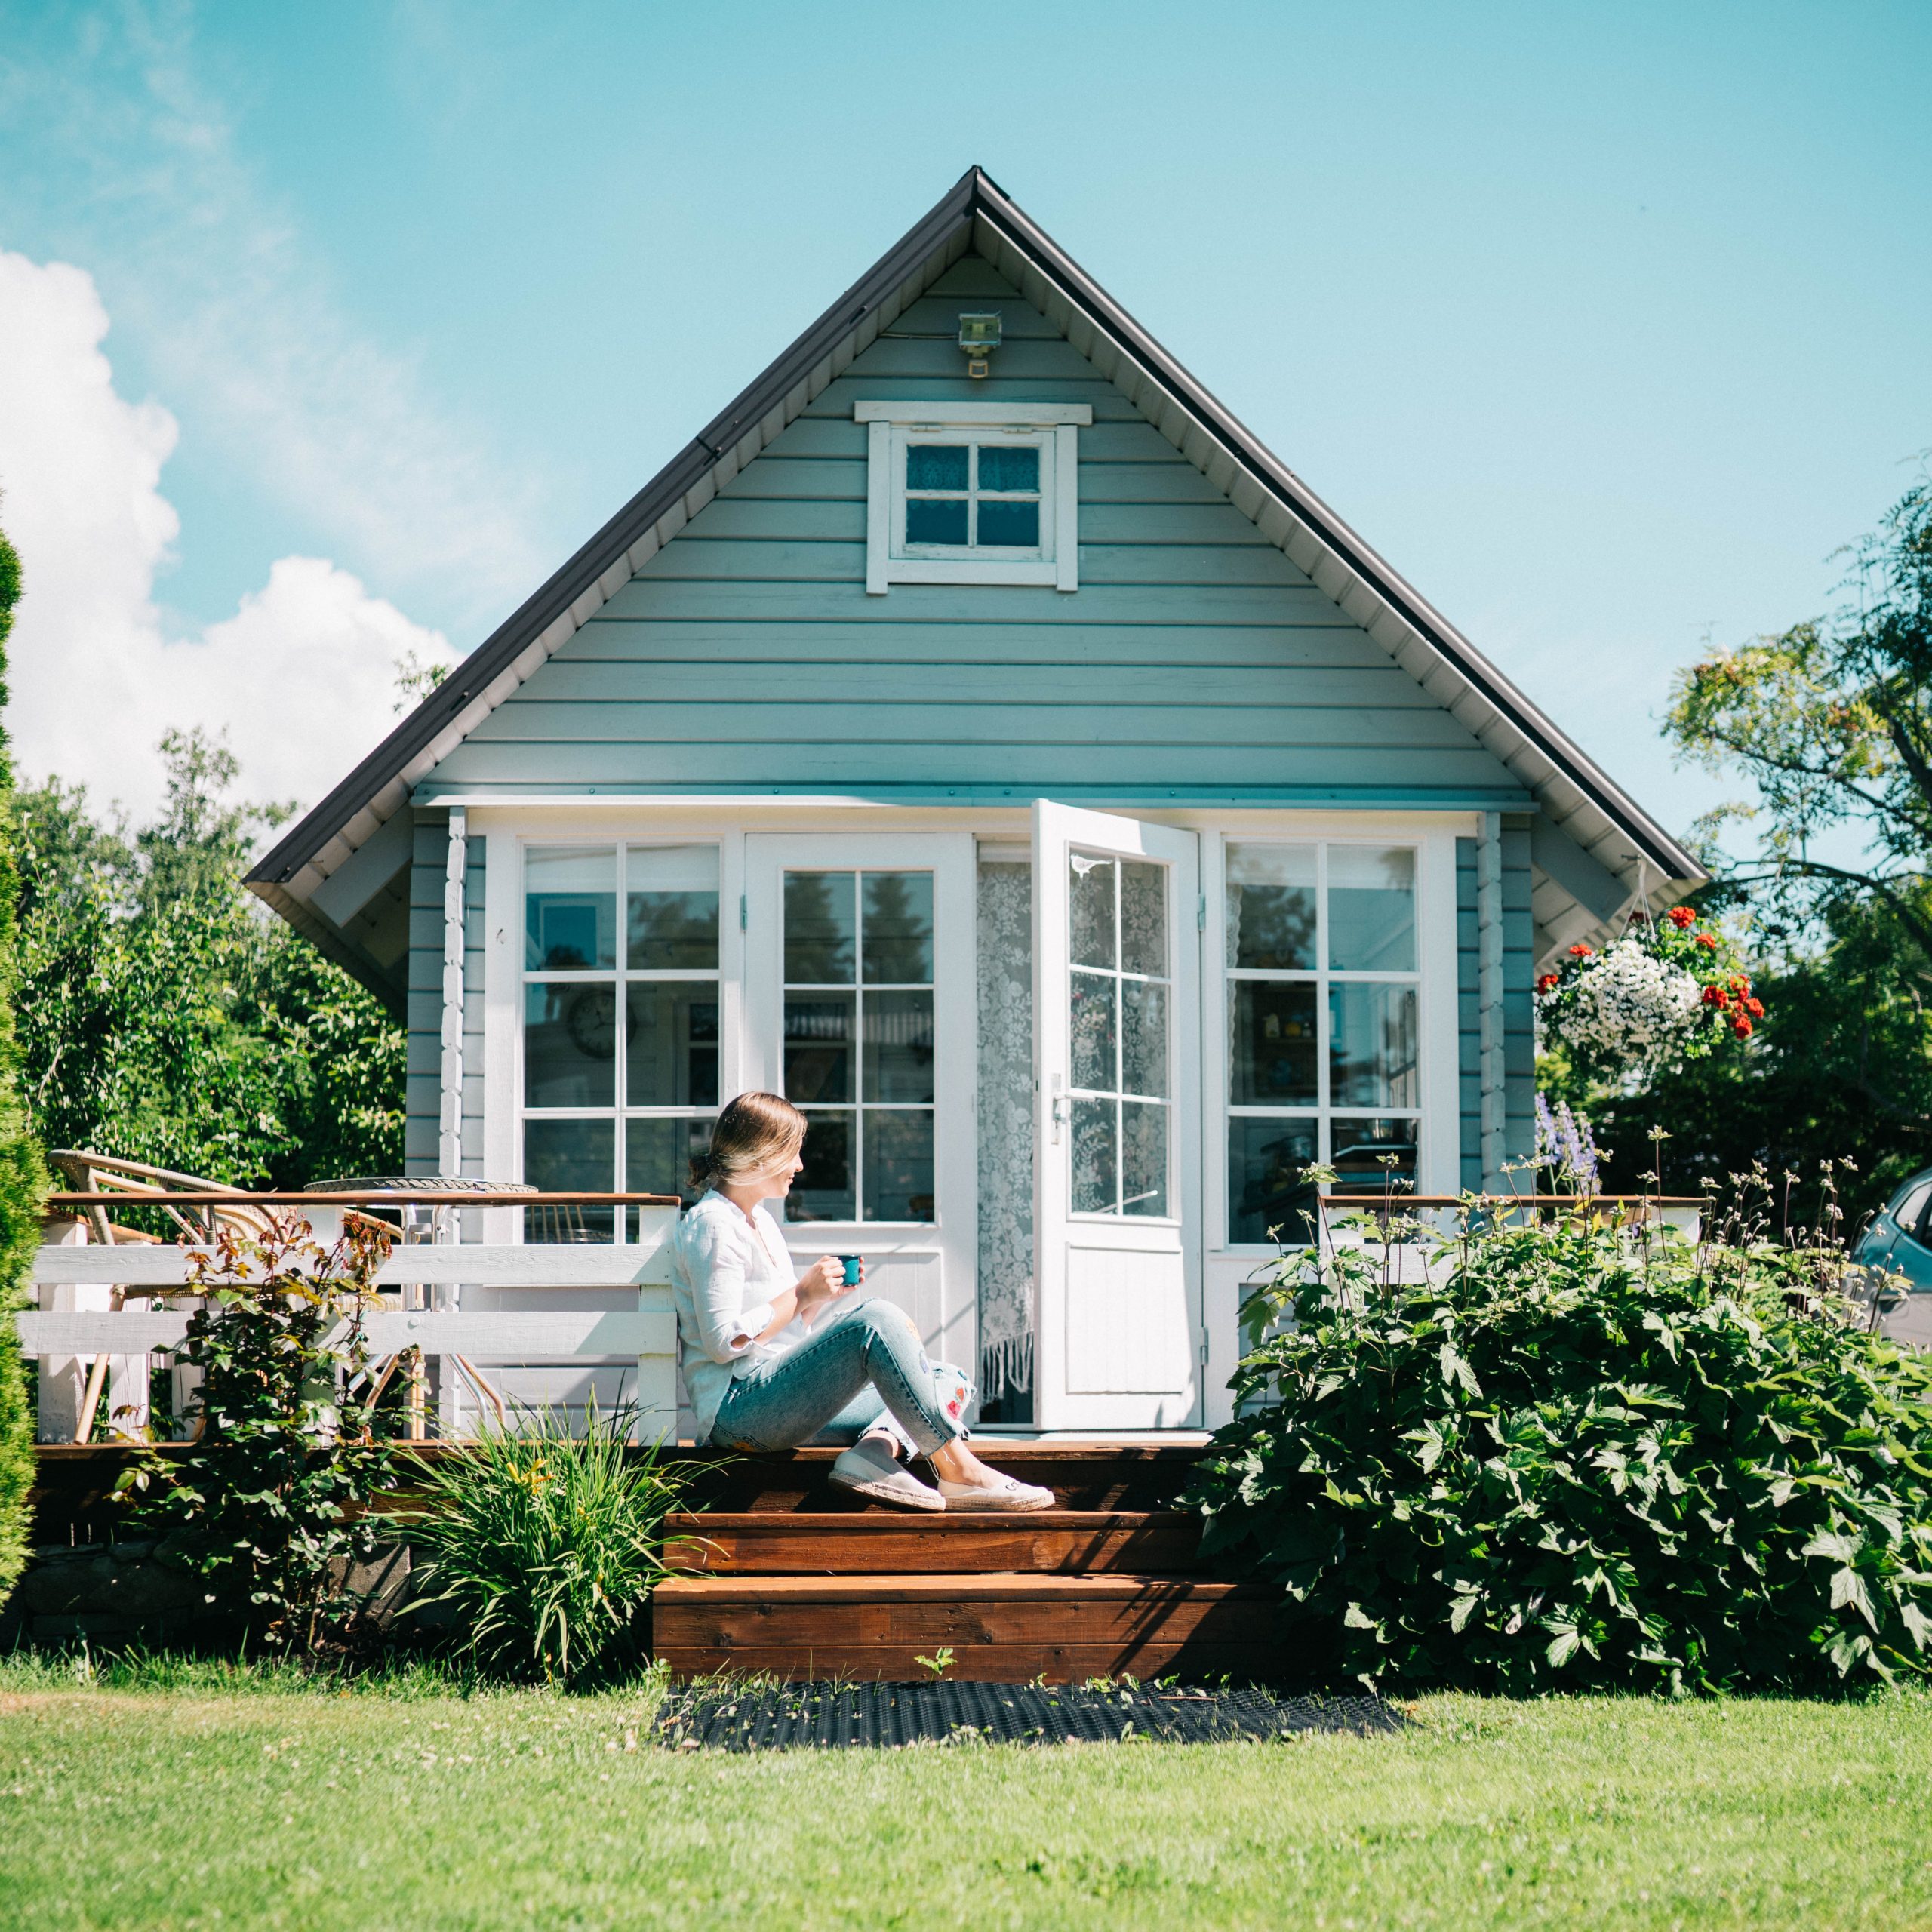 girl sitting on step of small blue house with white trim